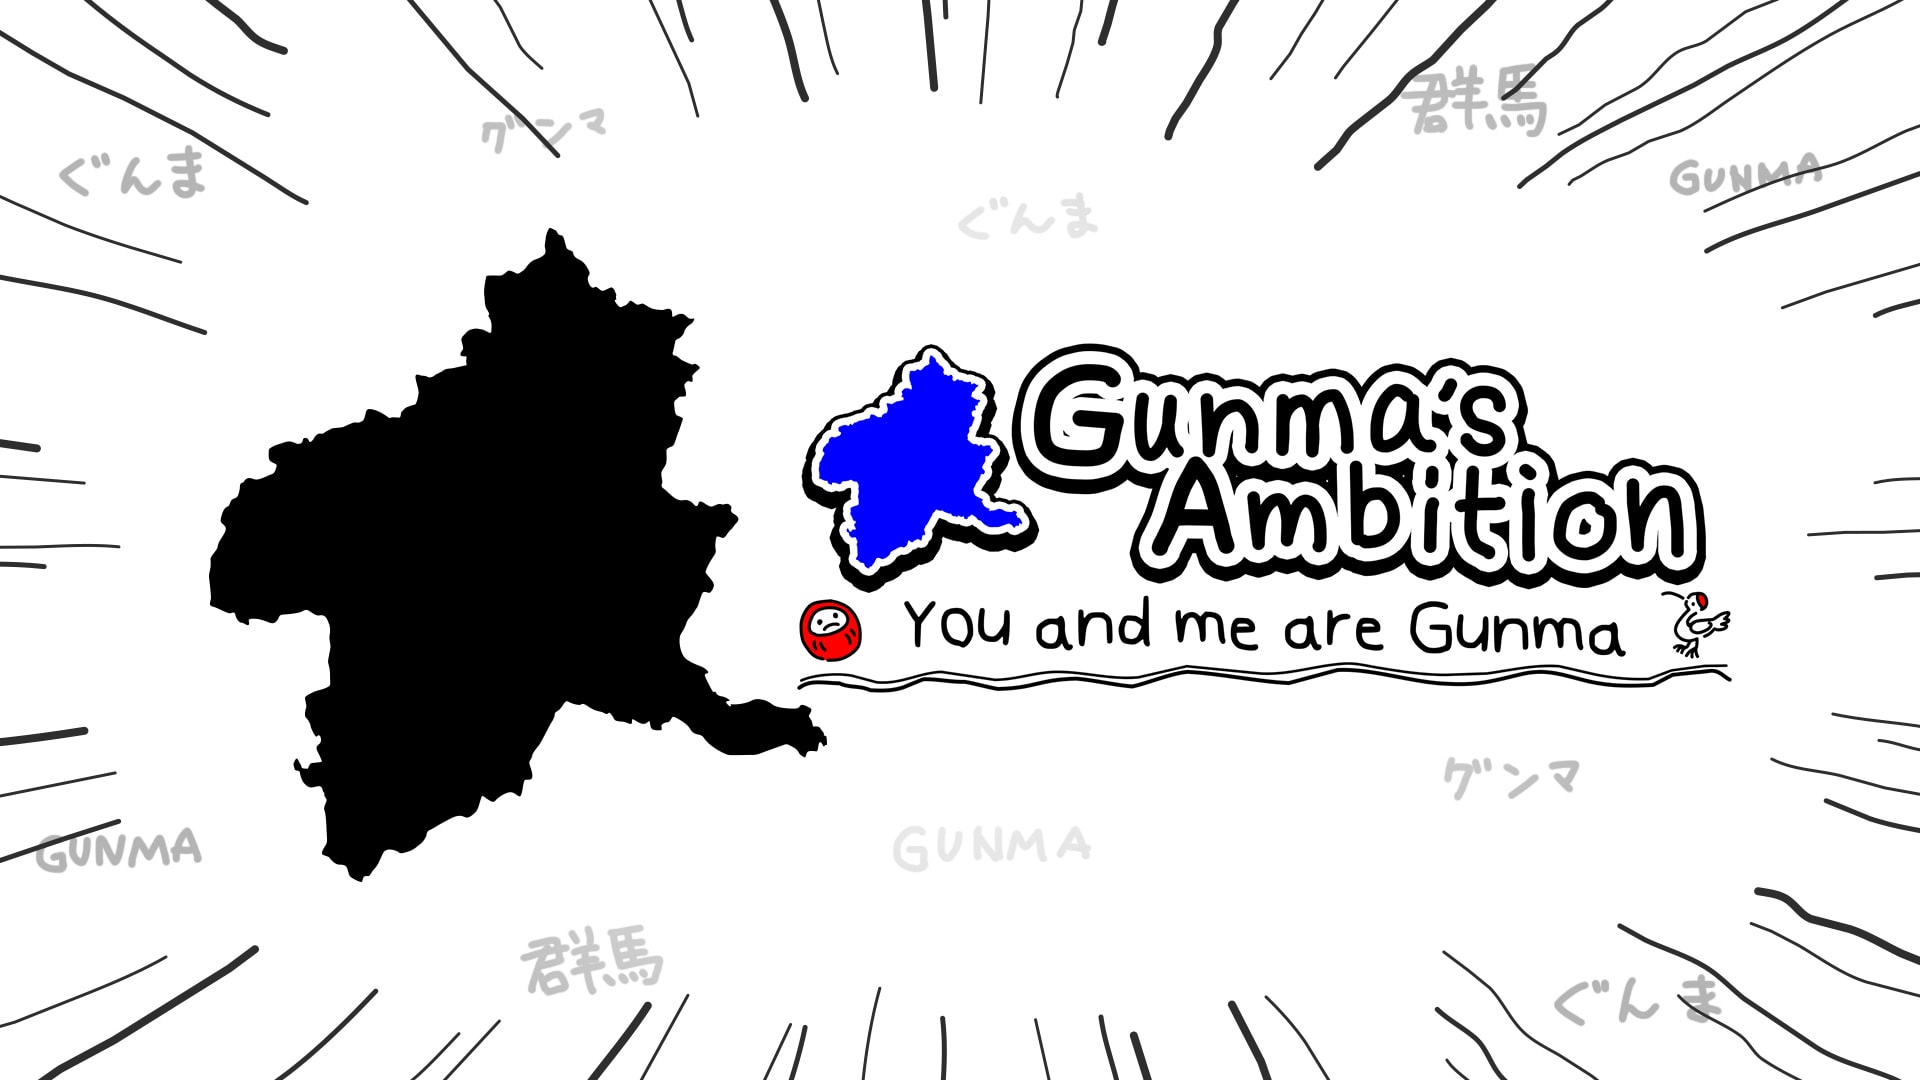 Gunma's Ambition  -You and me are Gunma-